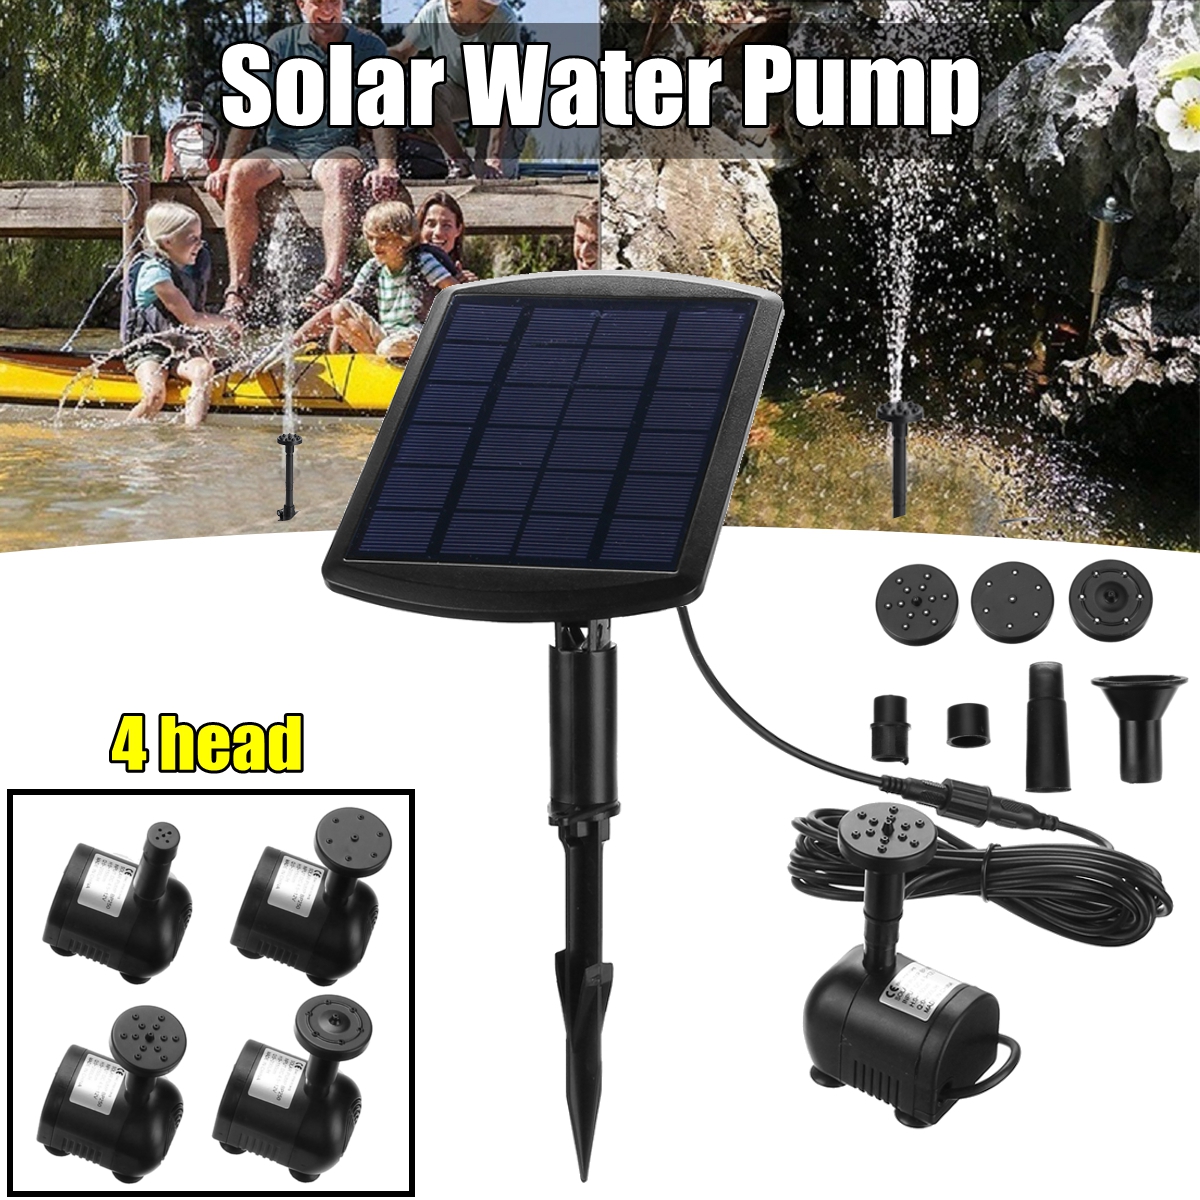 6V-18W-Solar-Panel-Powered-Water-Fountain-Pump-For-Pool-Pond-Garden-Outdoor-Submersible-1473018-1